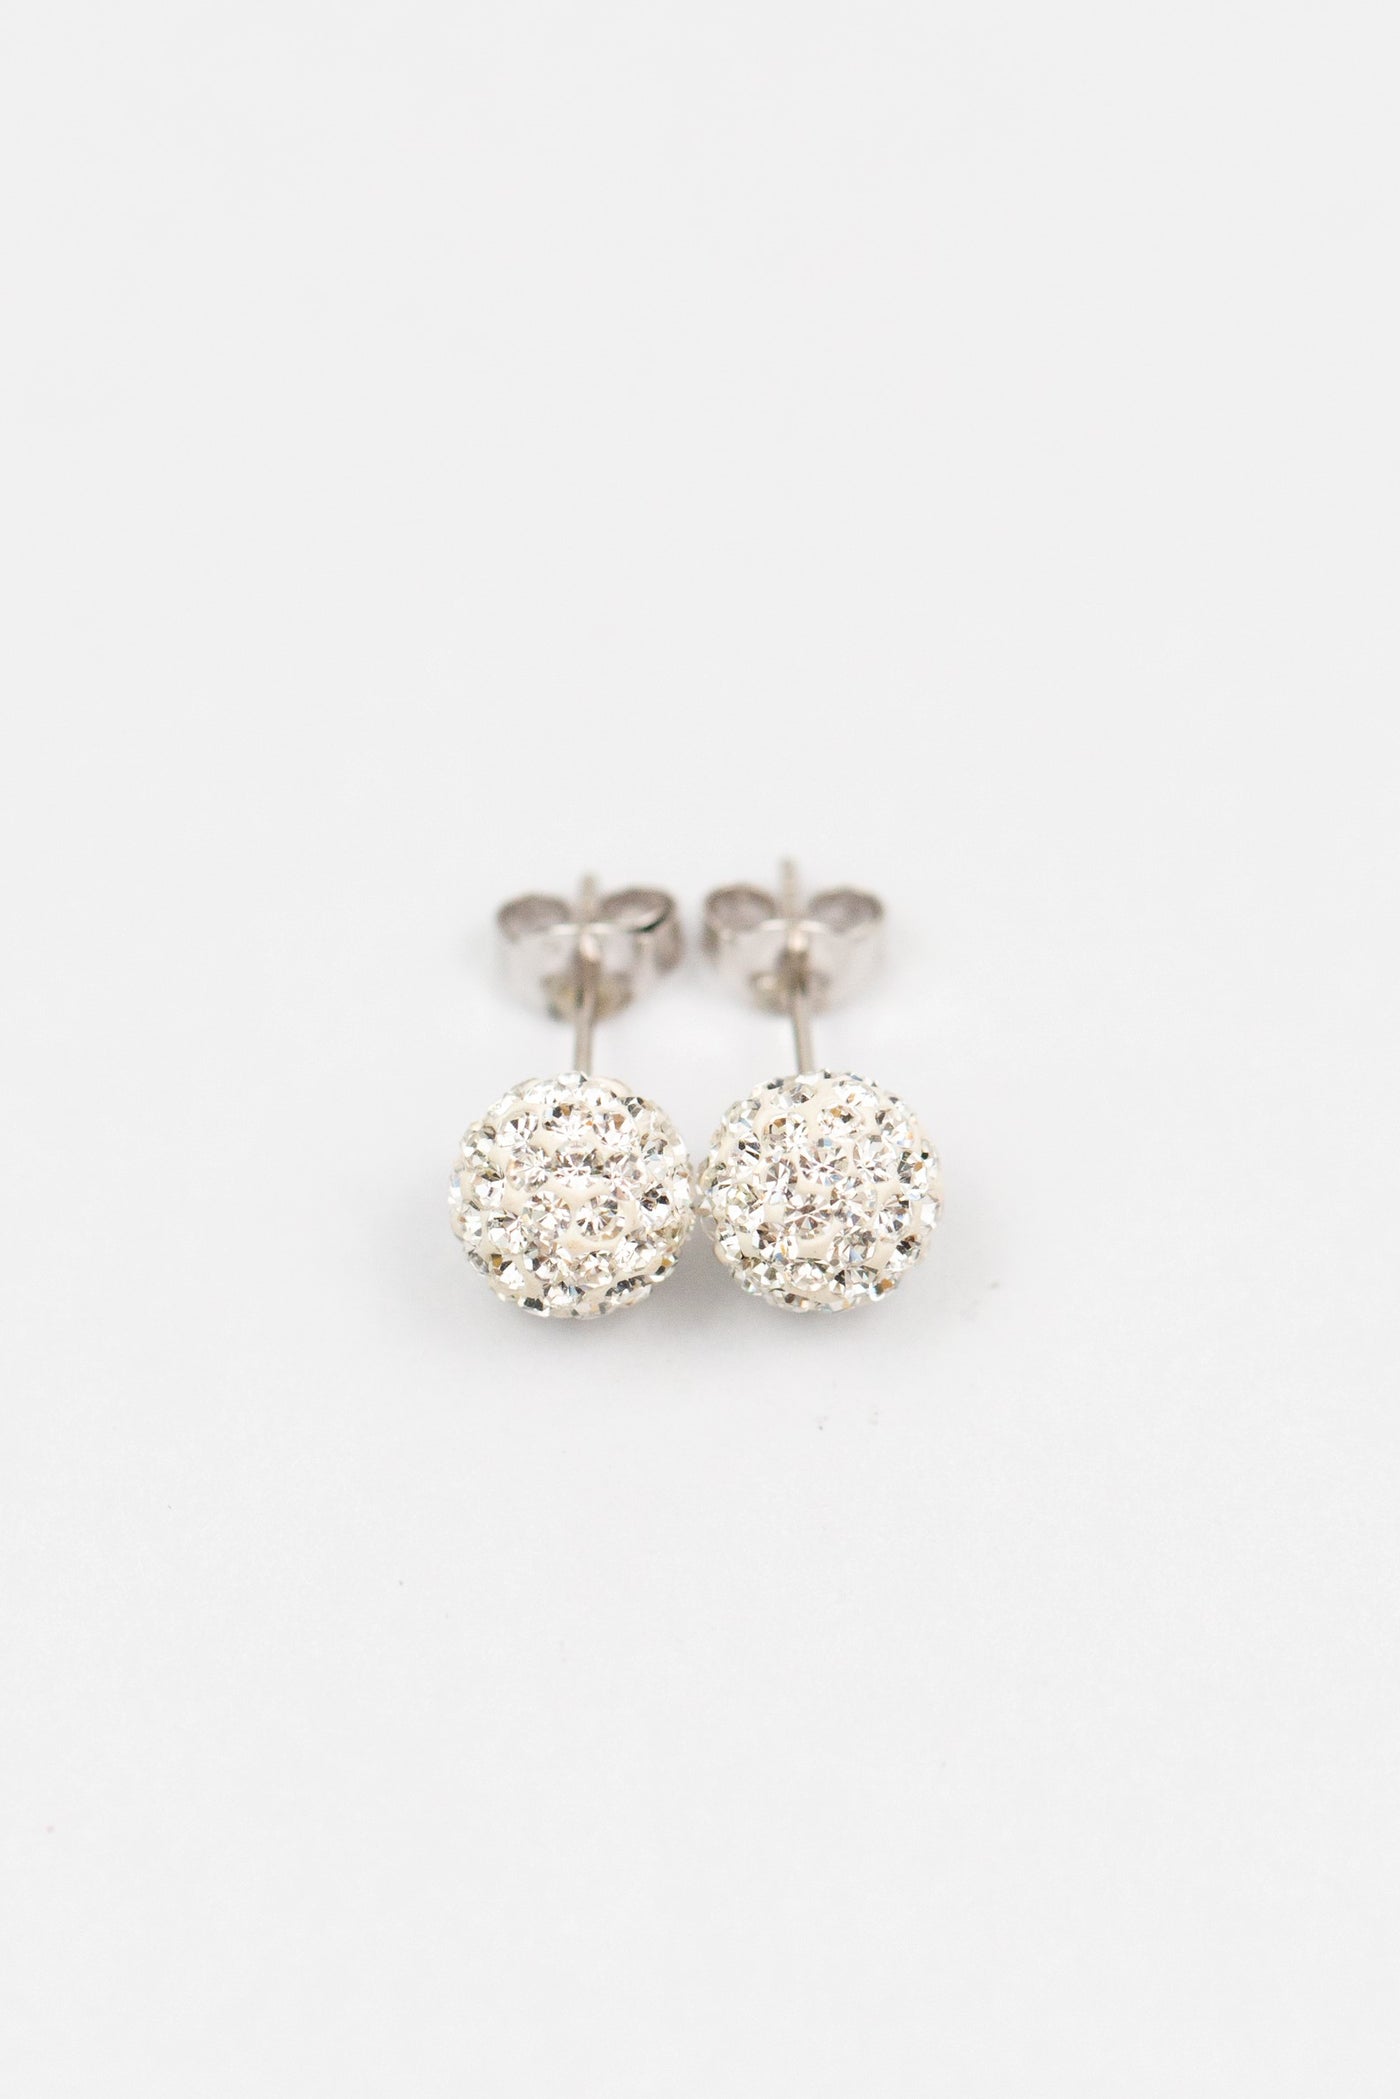 8mm Disco Ball Stud clear crystal Earrings | Annie and Sisters | sister stud earrings, for kids, children's jewelry, kid's jewelry, best friend